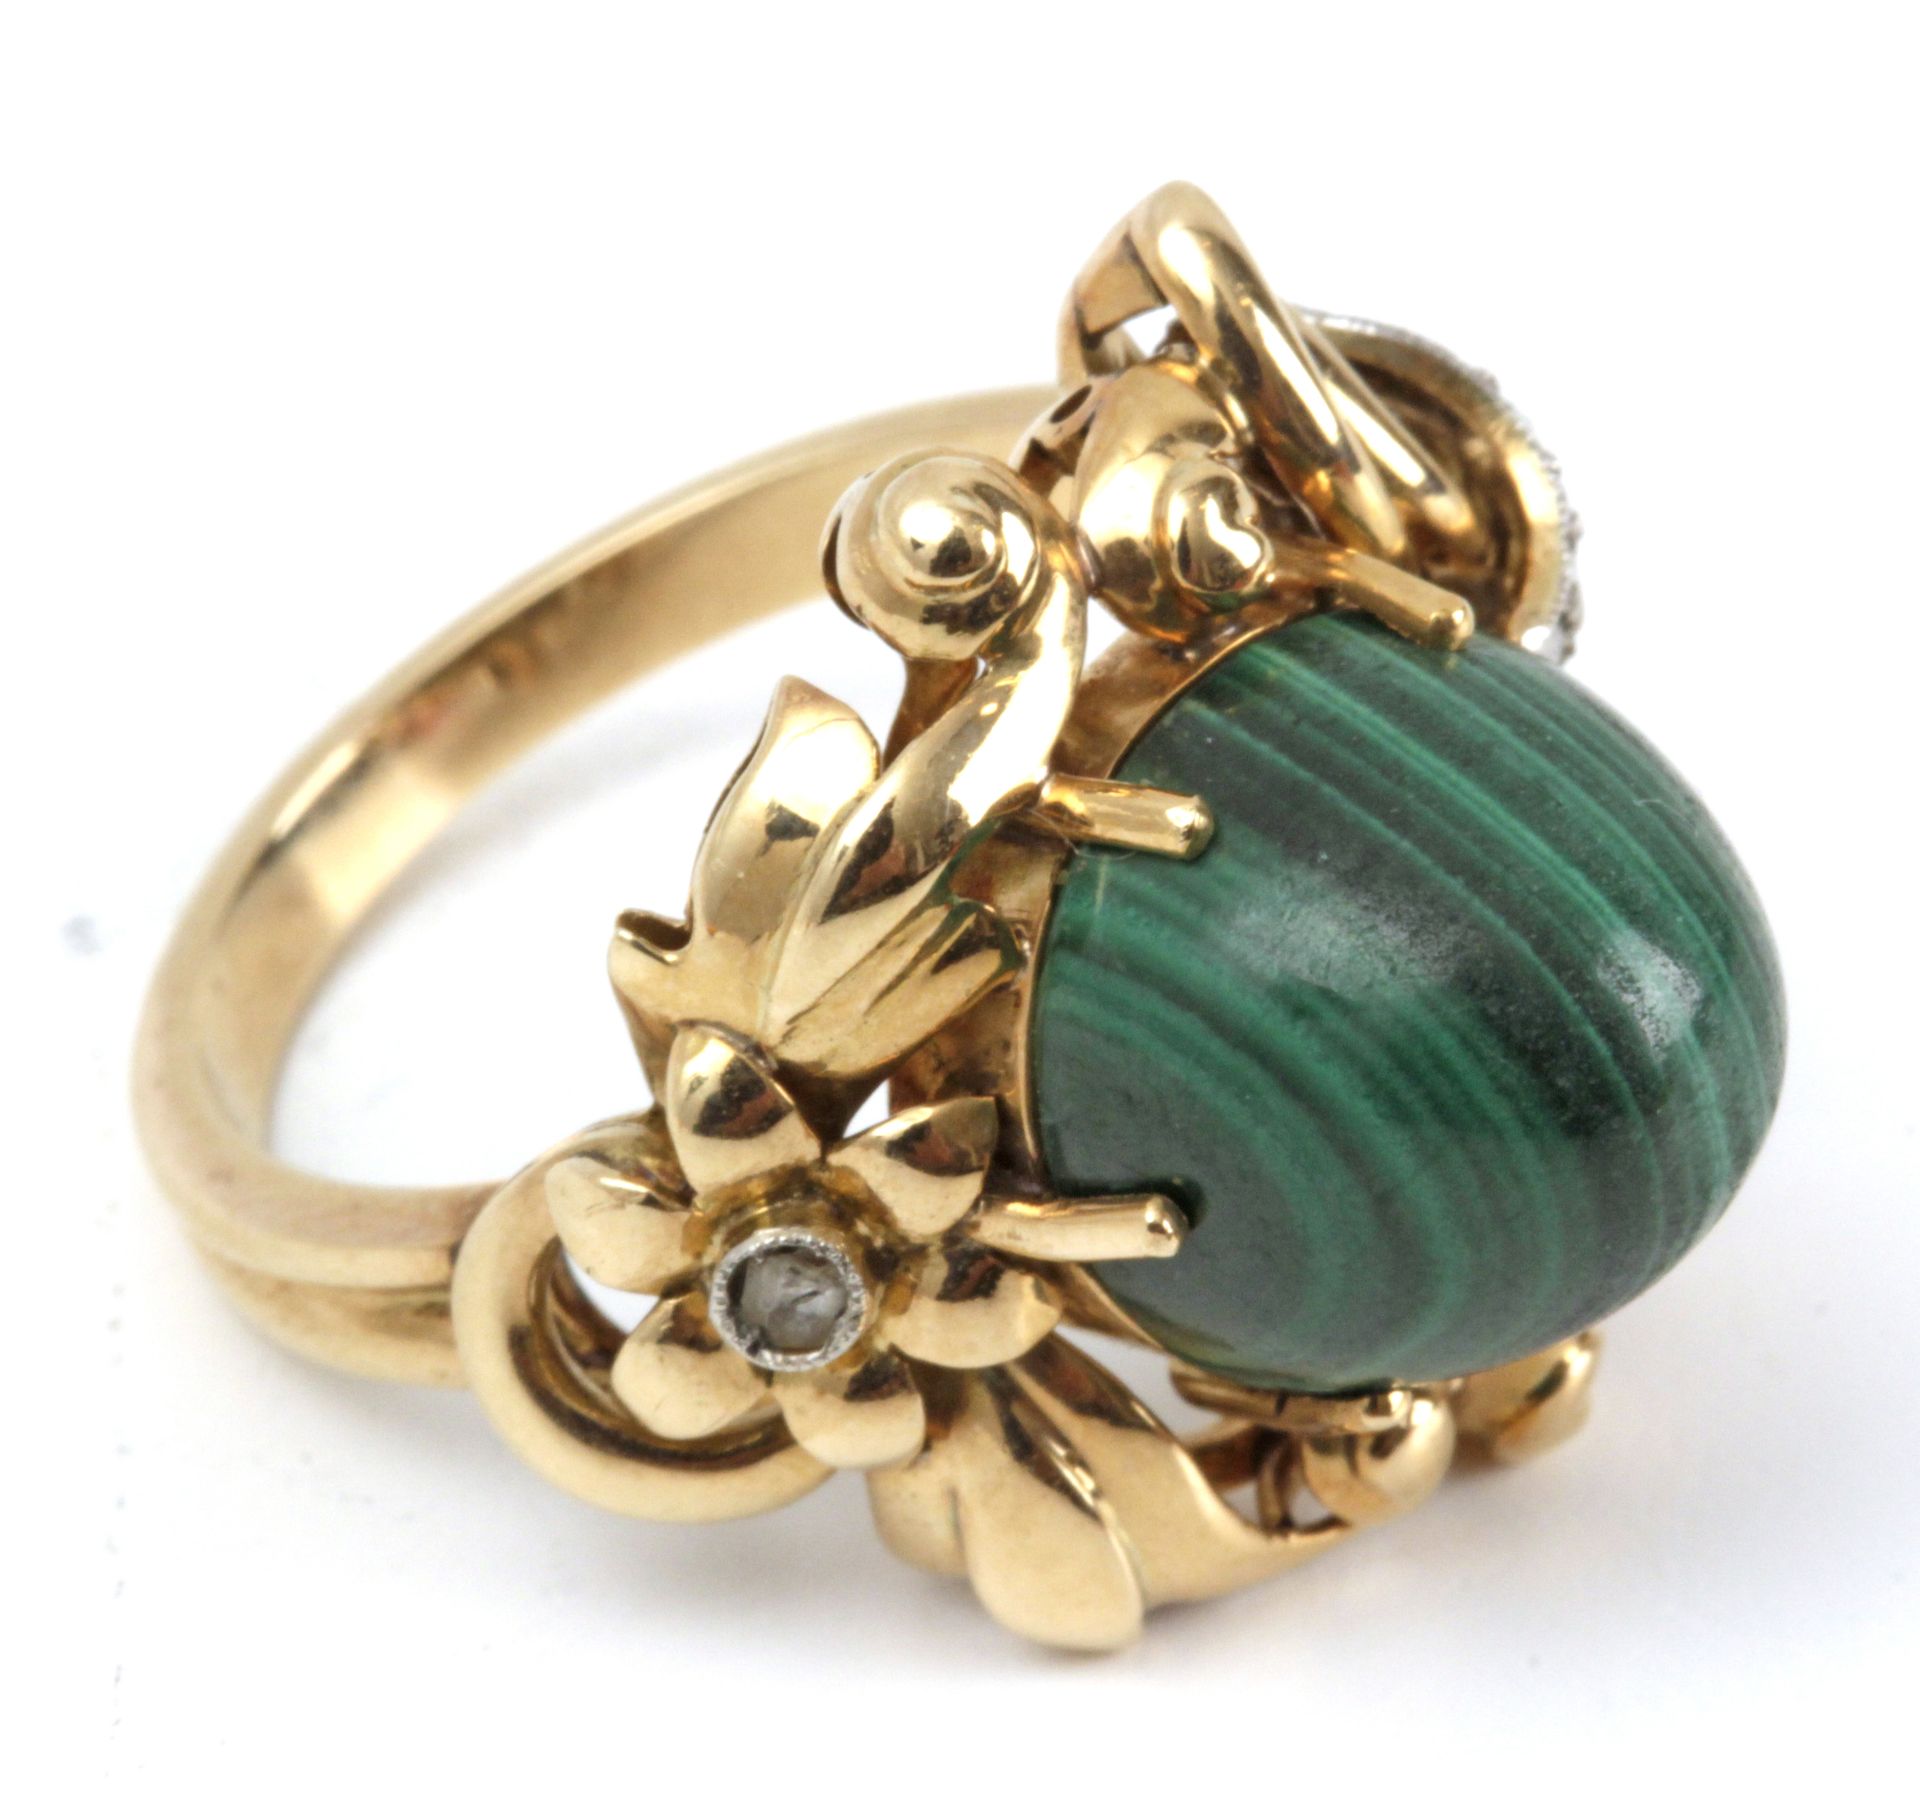 A malachite and diamonds ring circa 1950 with an 18k. yellow gold setting - Image 2 of 3